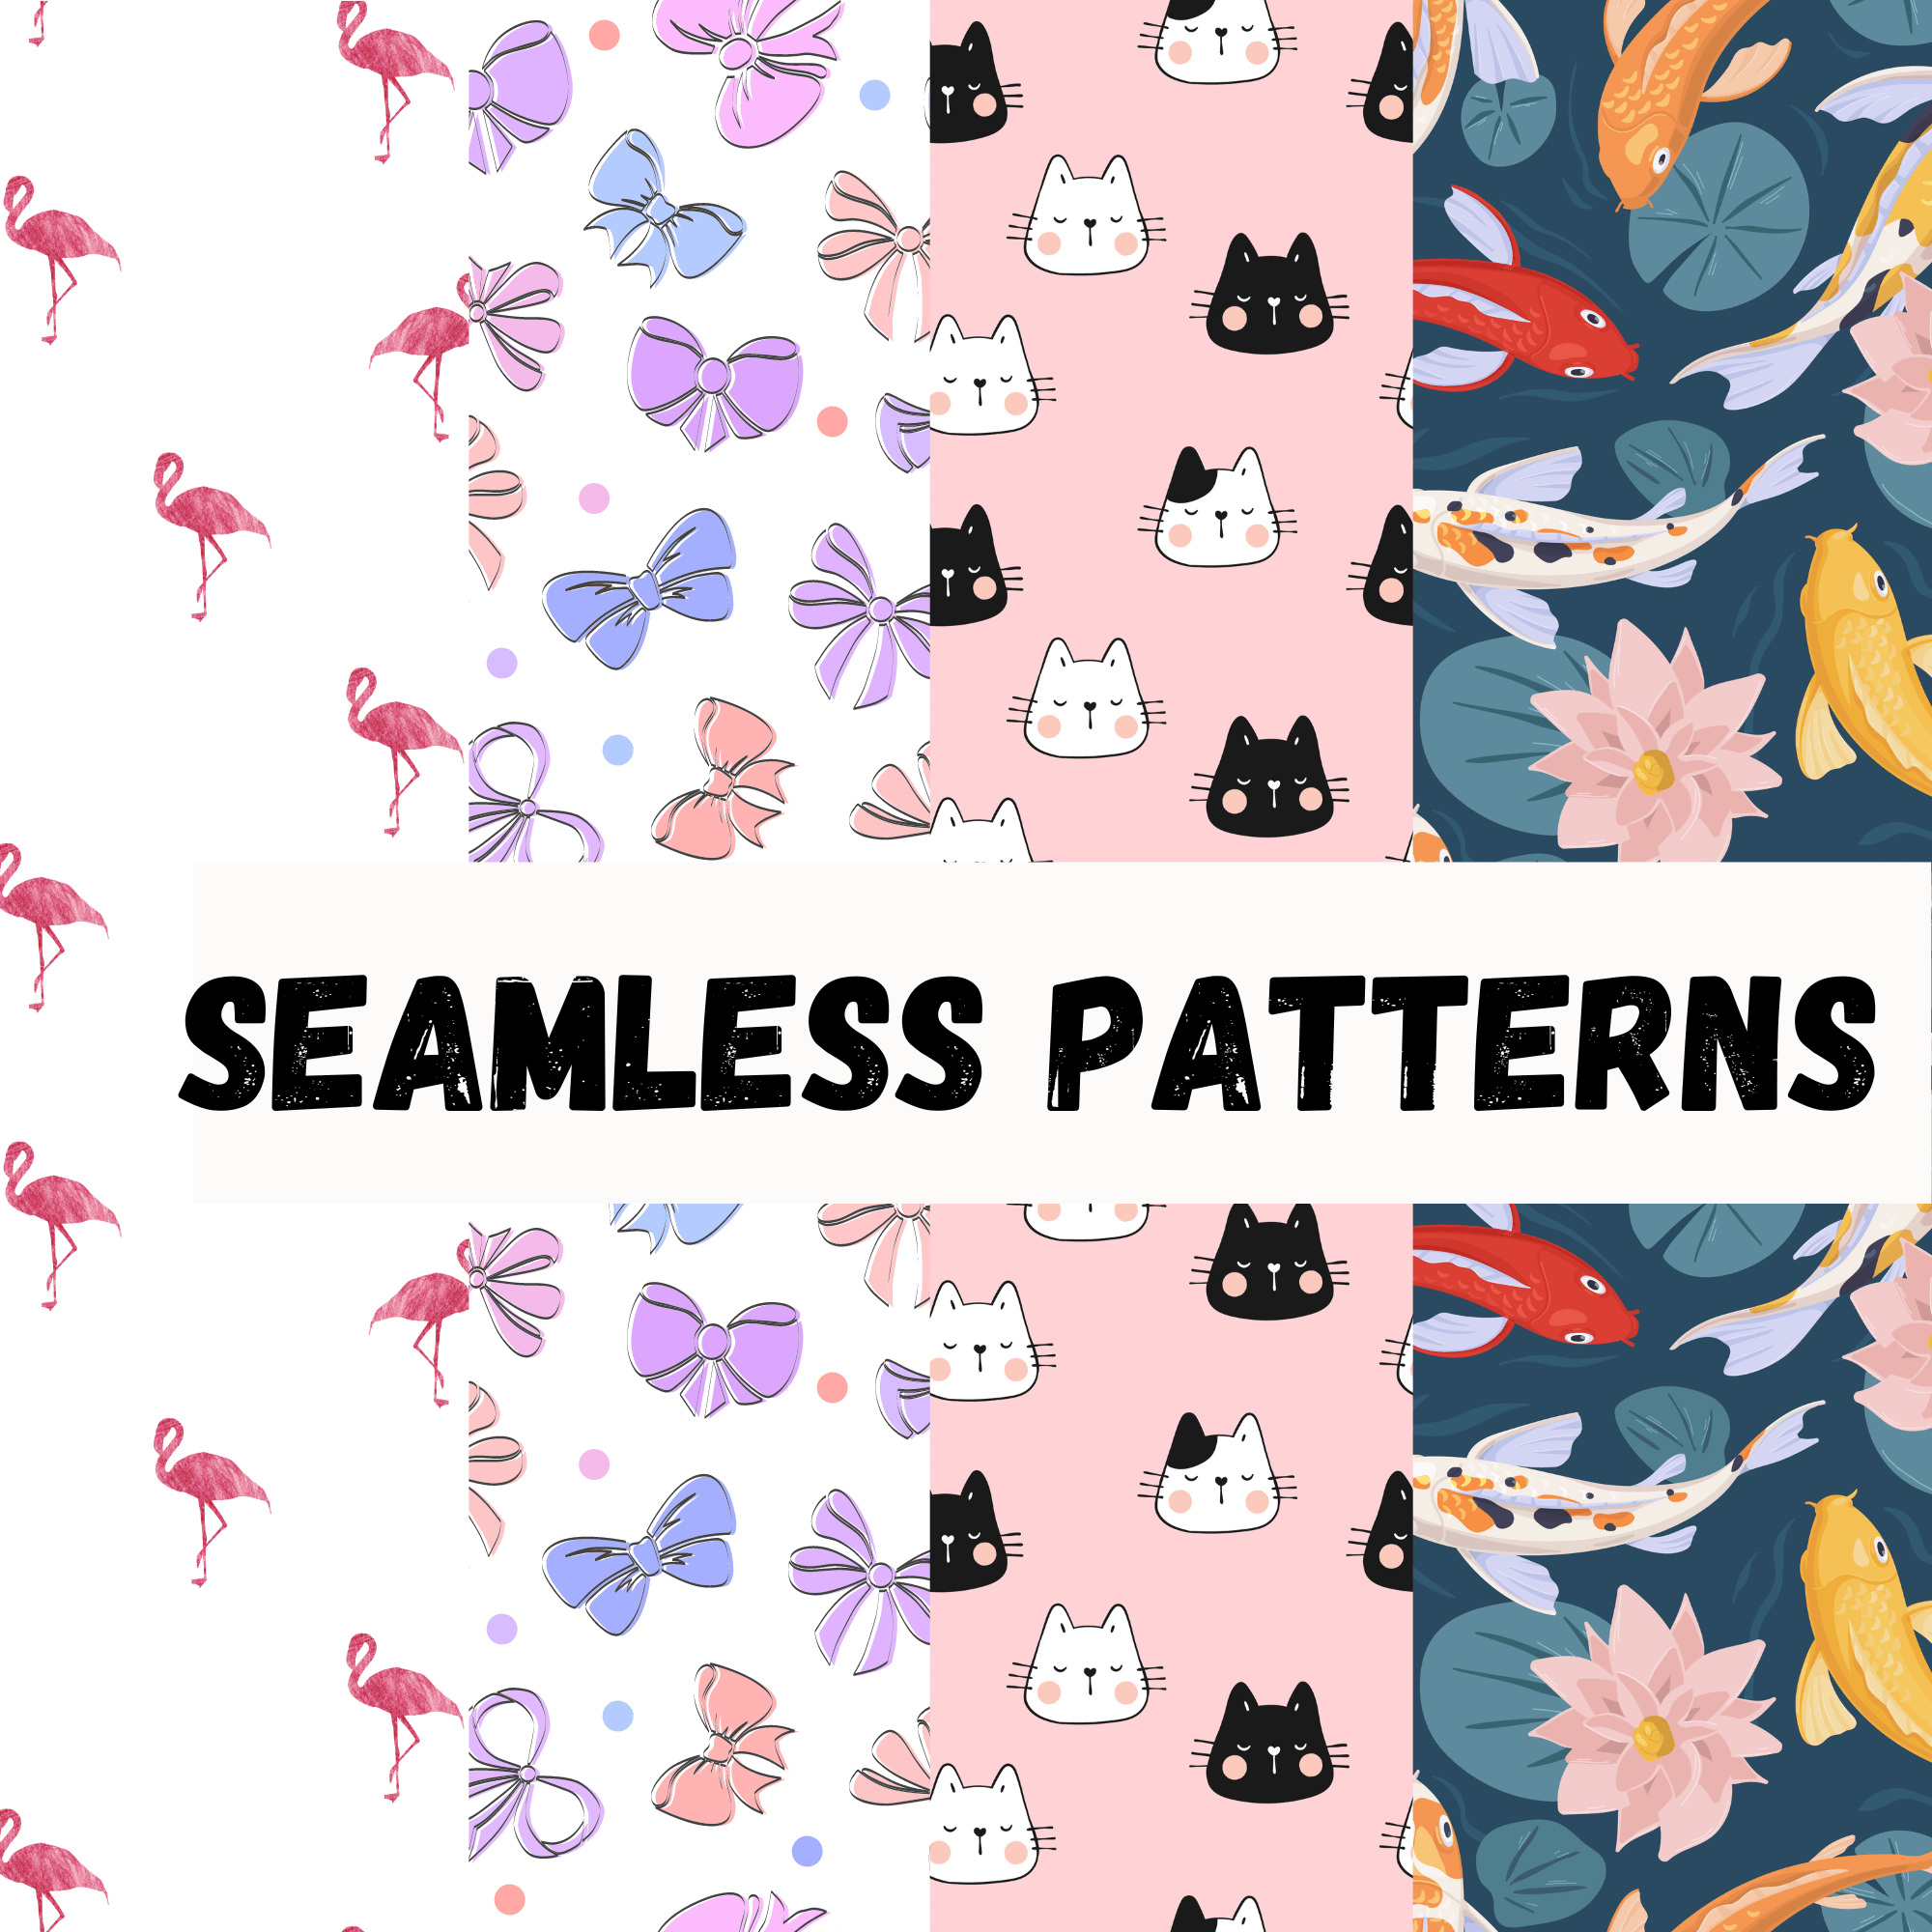 Seamless Patterns: Elevate Your Designs with Endless Possibilities cover image.